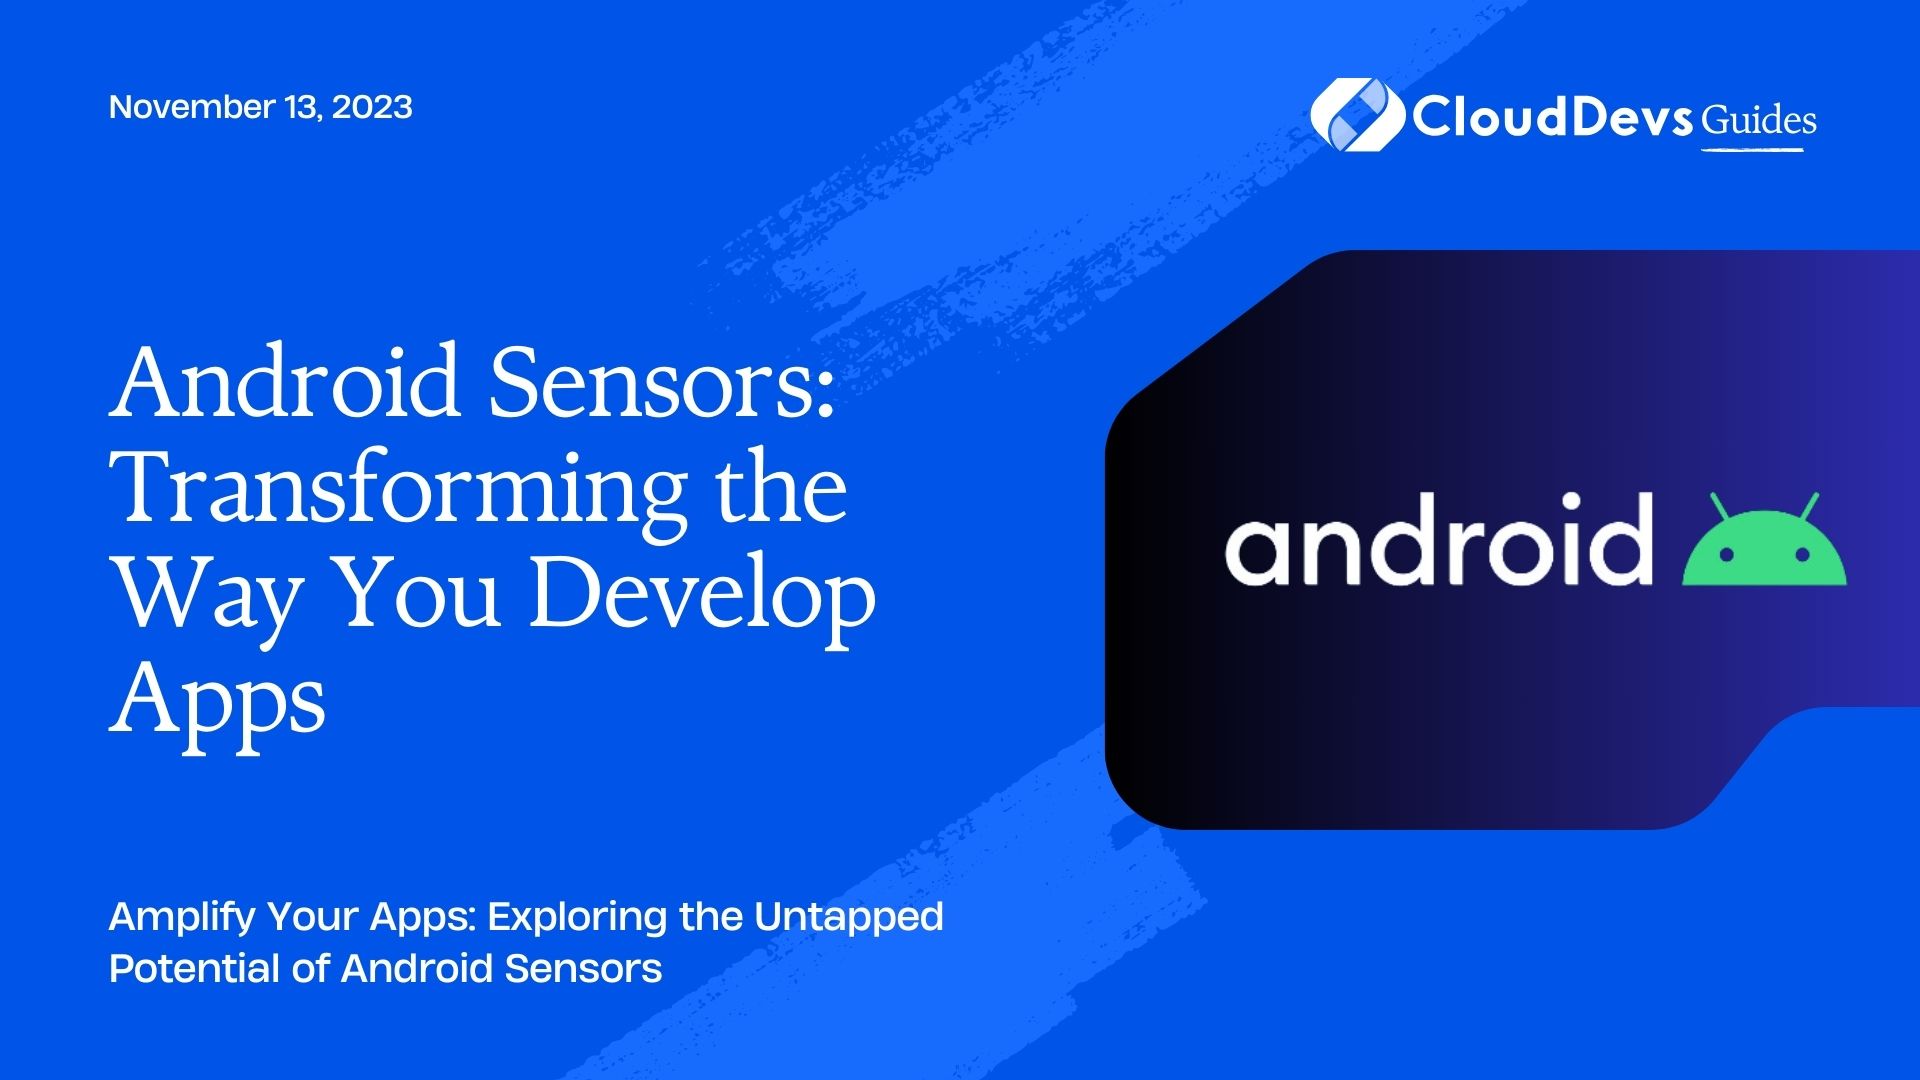 Android Sensors: Transforming the Way You Develop Apps